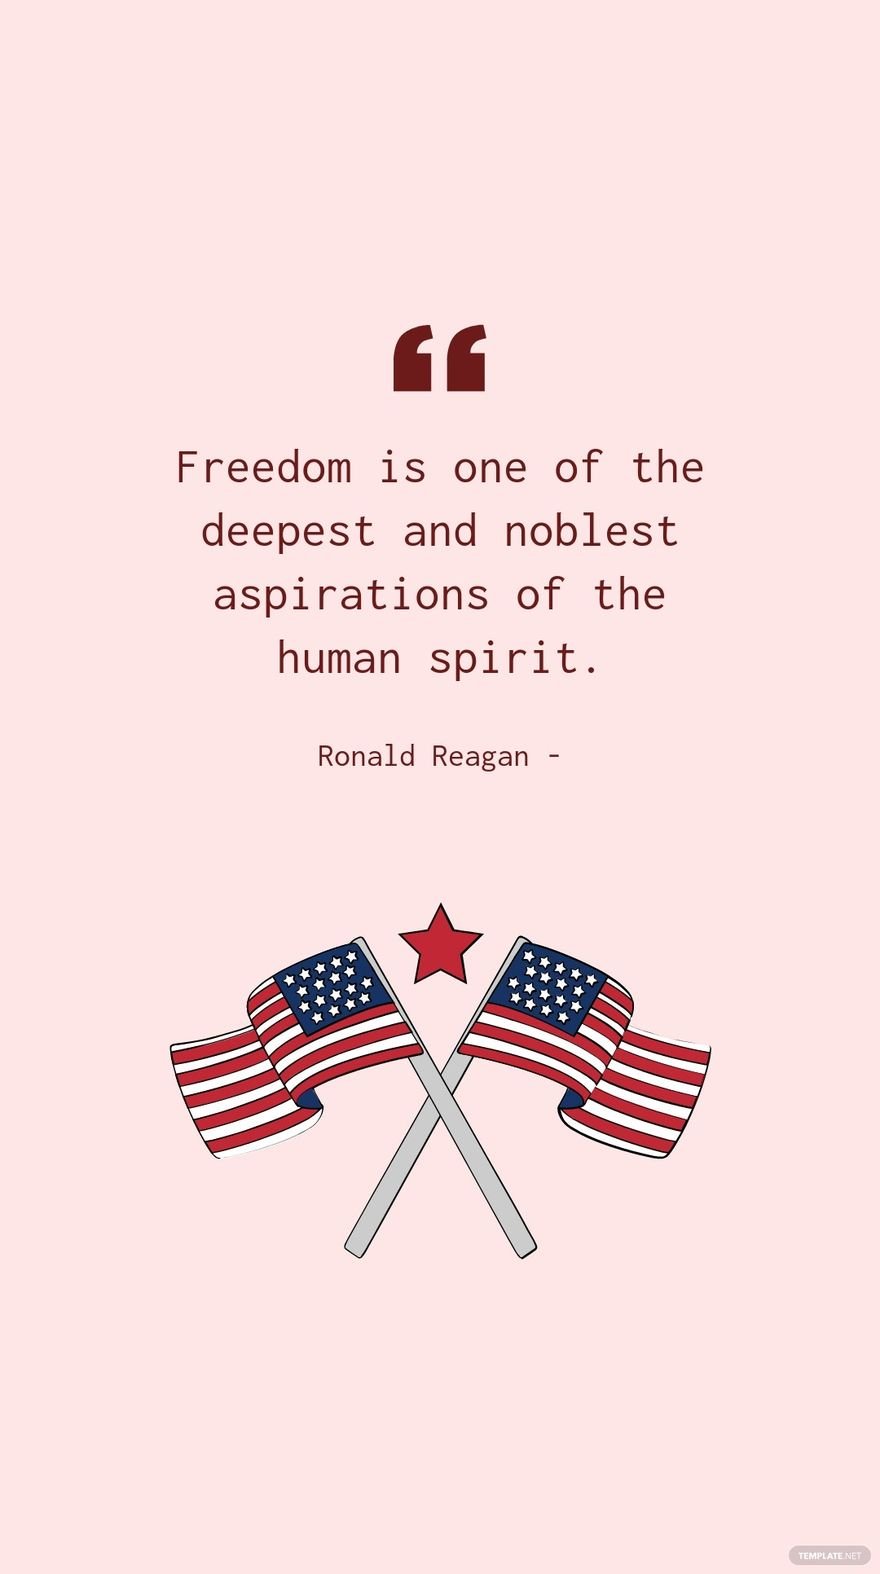 Ronald Reagan - Freedom is one of the deepest and noblest aspirations of the human spirit.